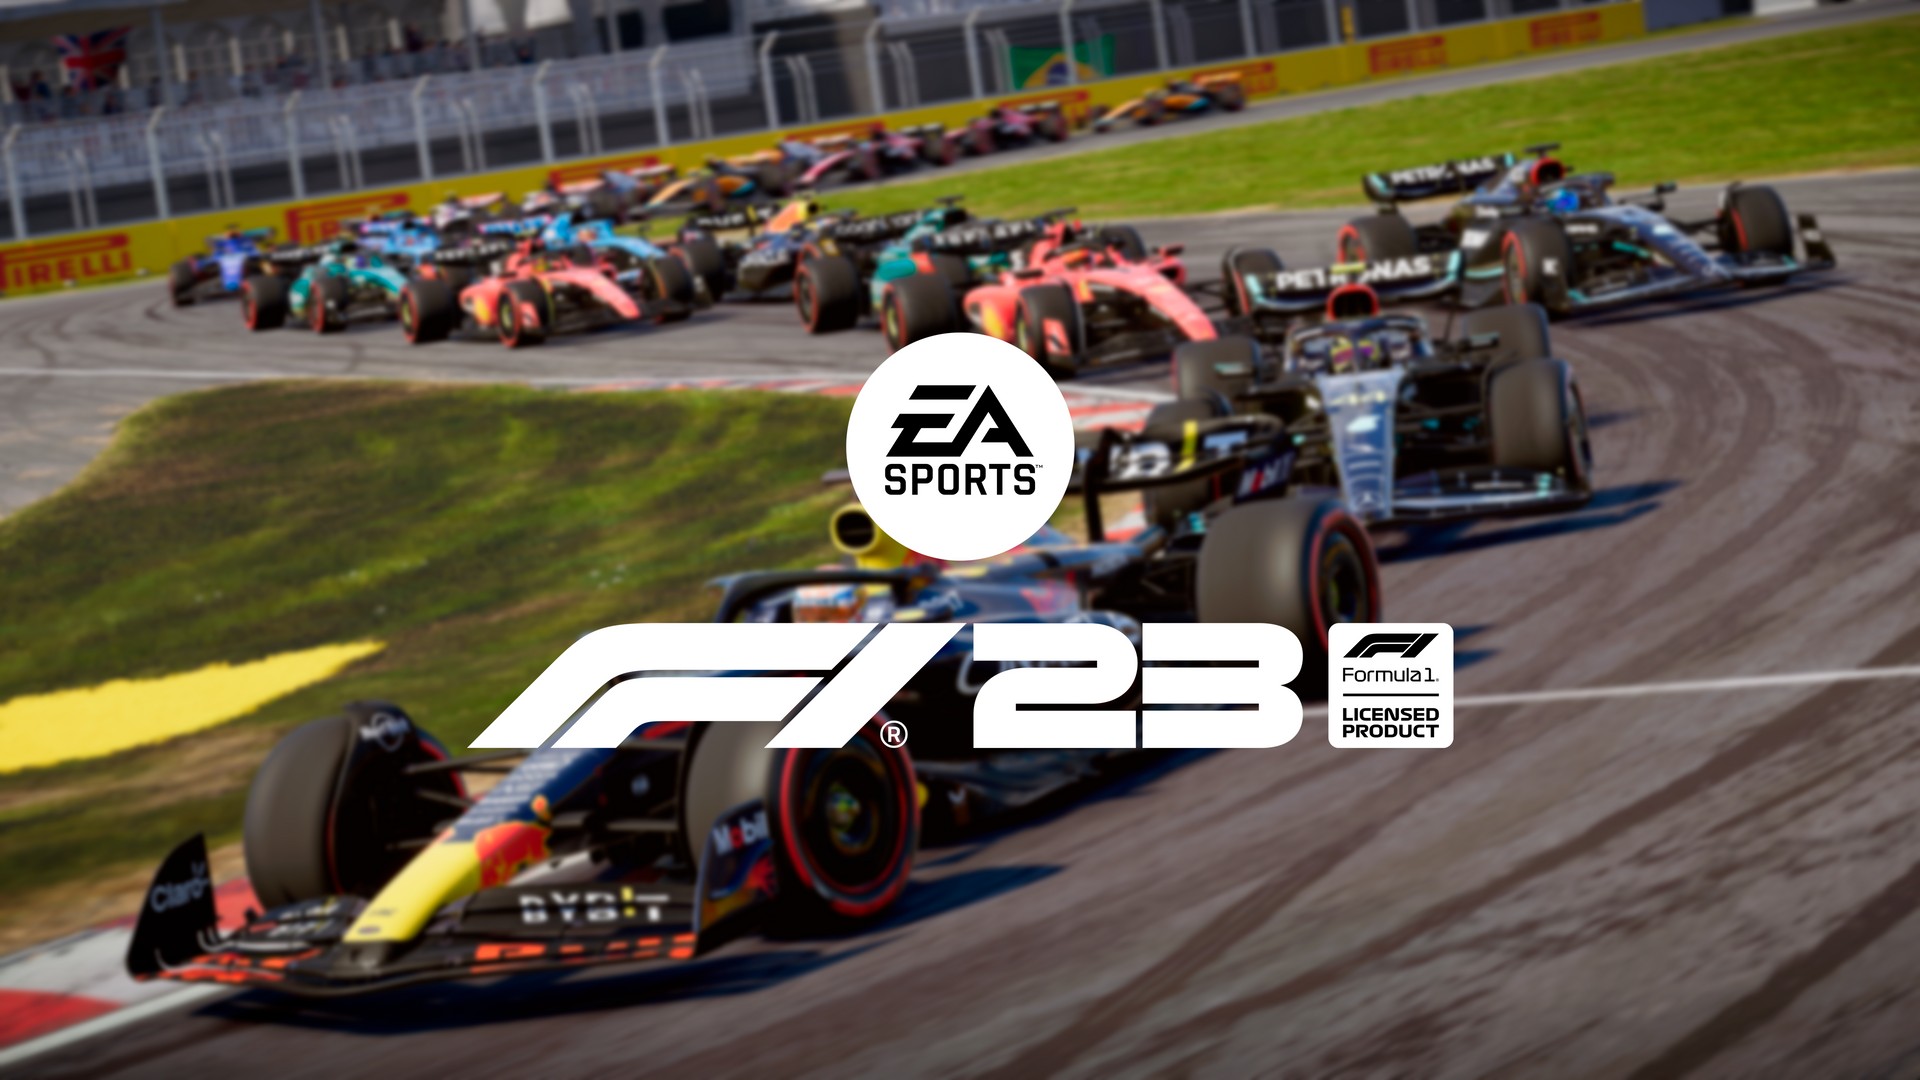 F1 23 brings back story mode and an "Ultimate Team" to call your own